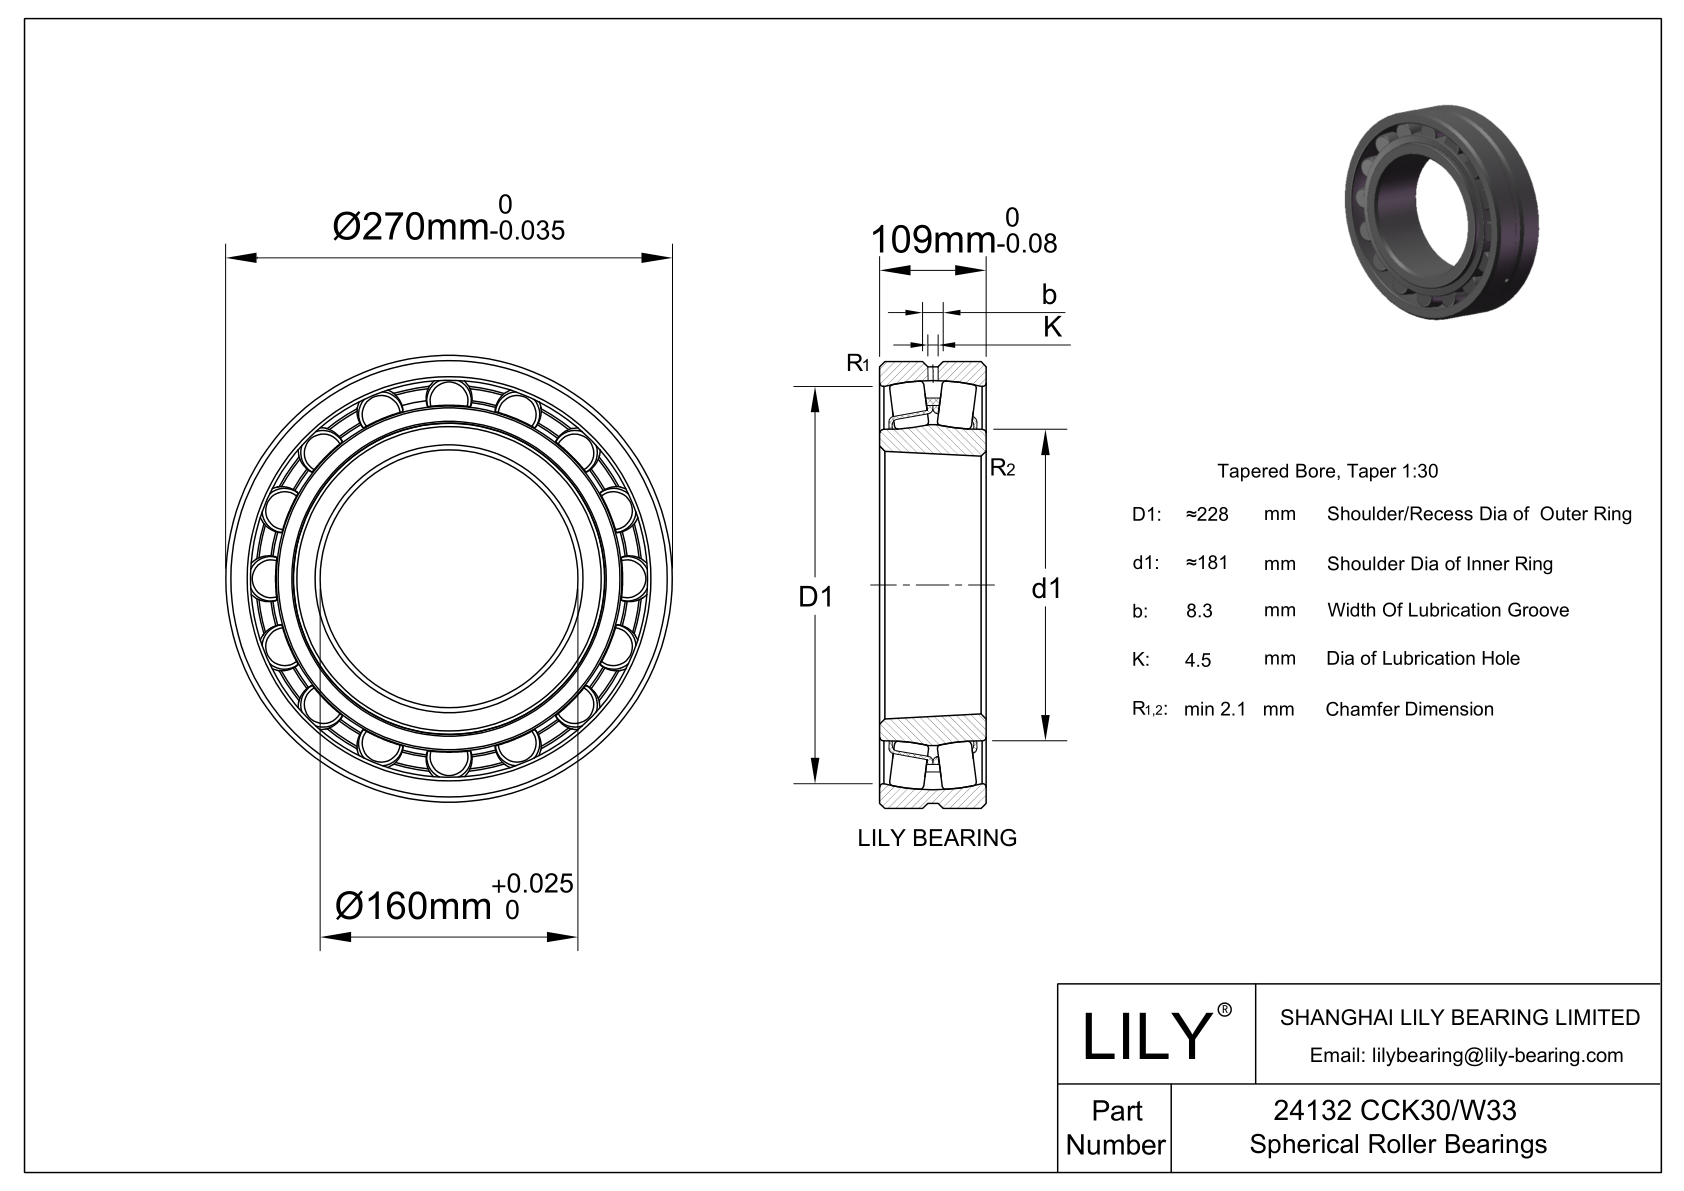 24132 CCK30/W33 Double Row Spherical Roller Bearing cad drawing